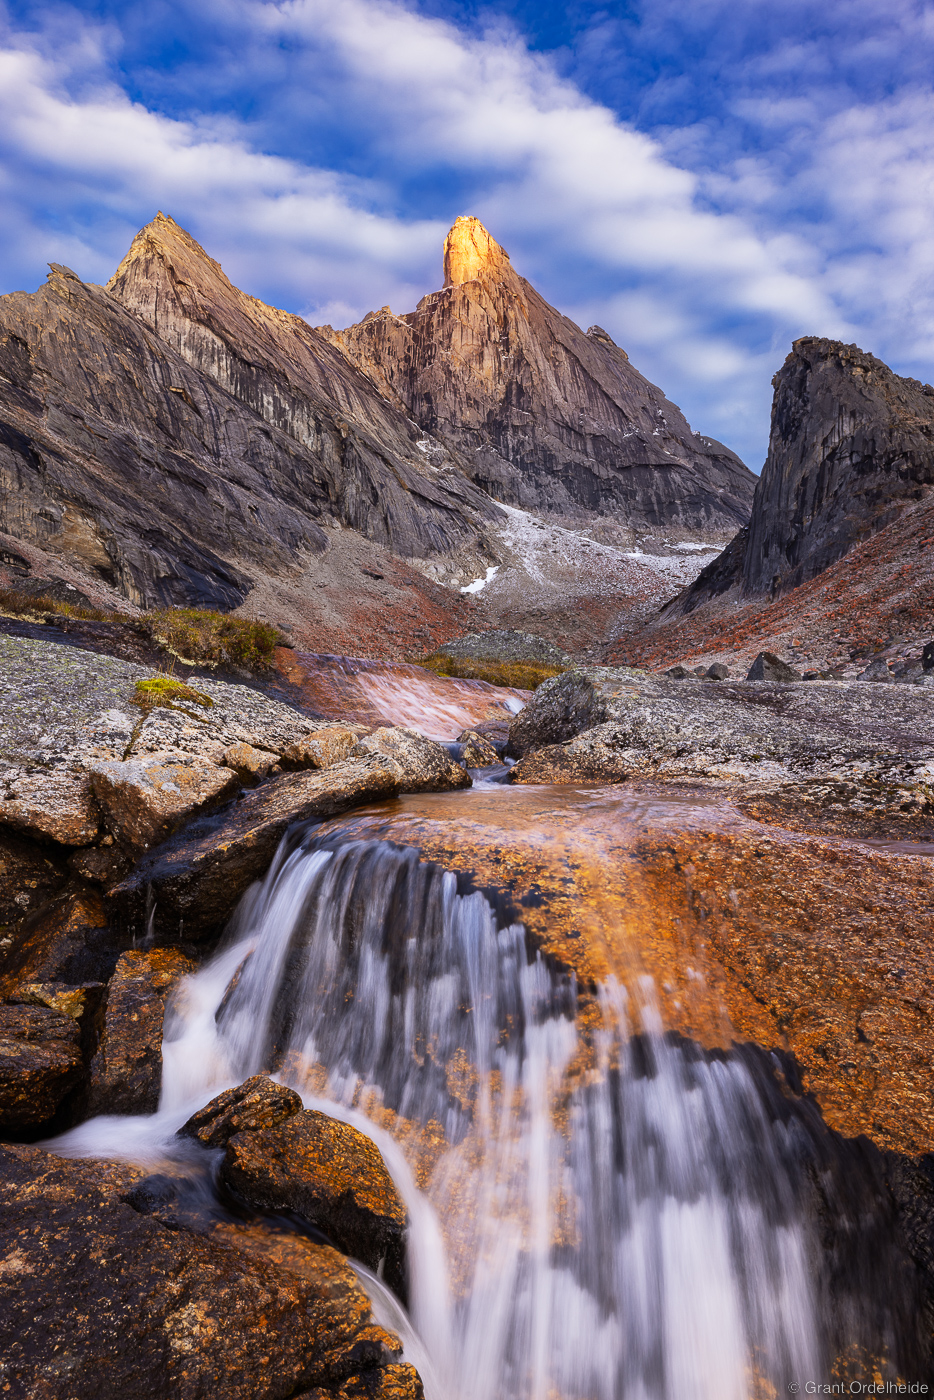 Evening on the beautiful Shot Tower, a remote peak deep in Gates of the Arctic National Park.